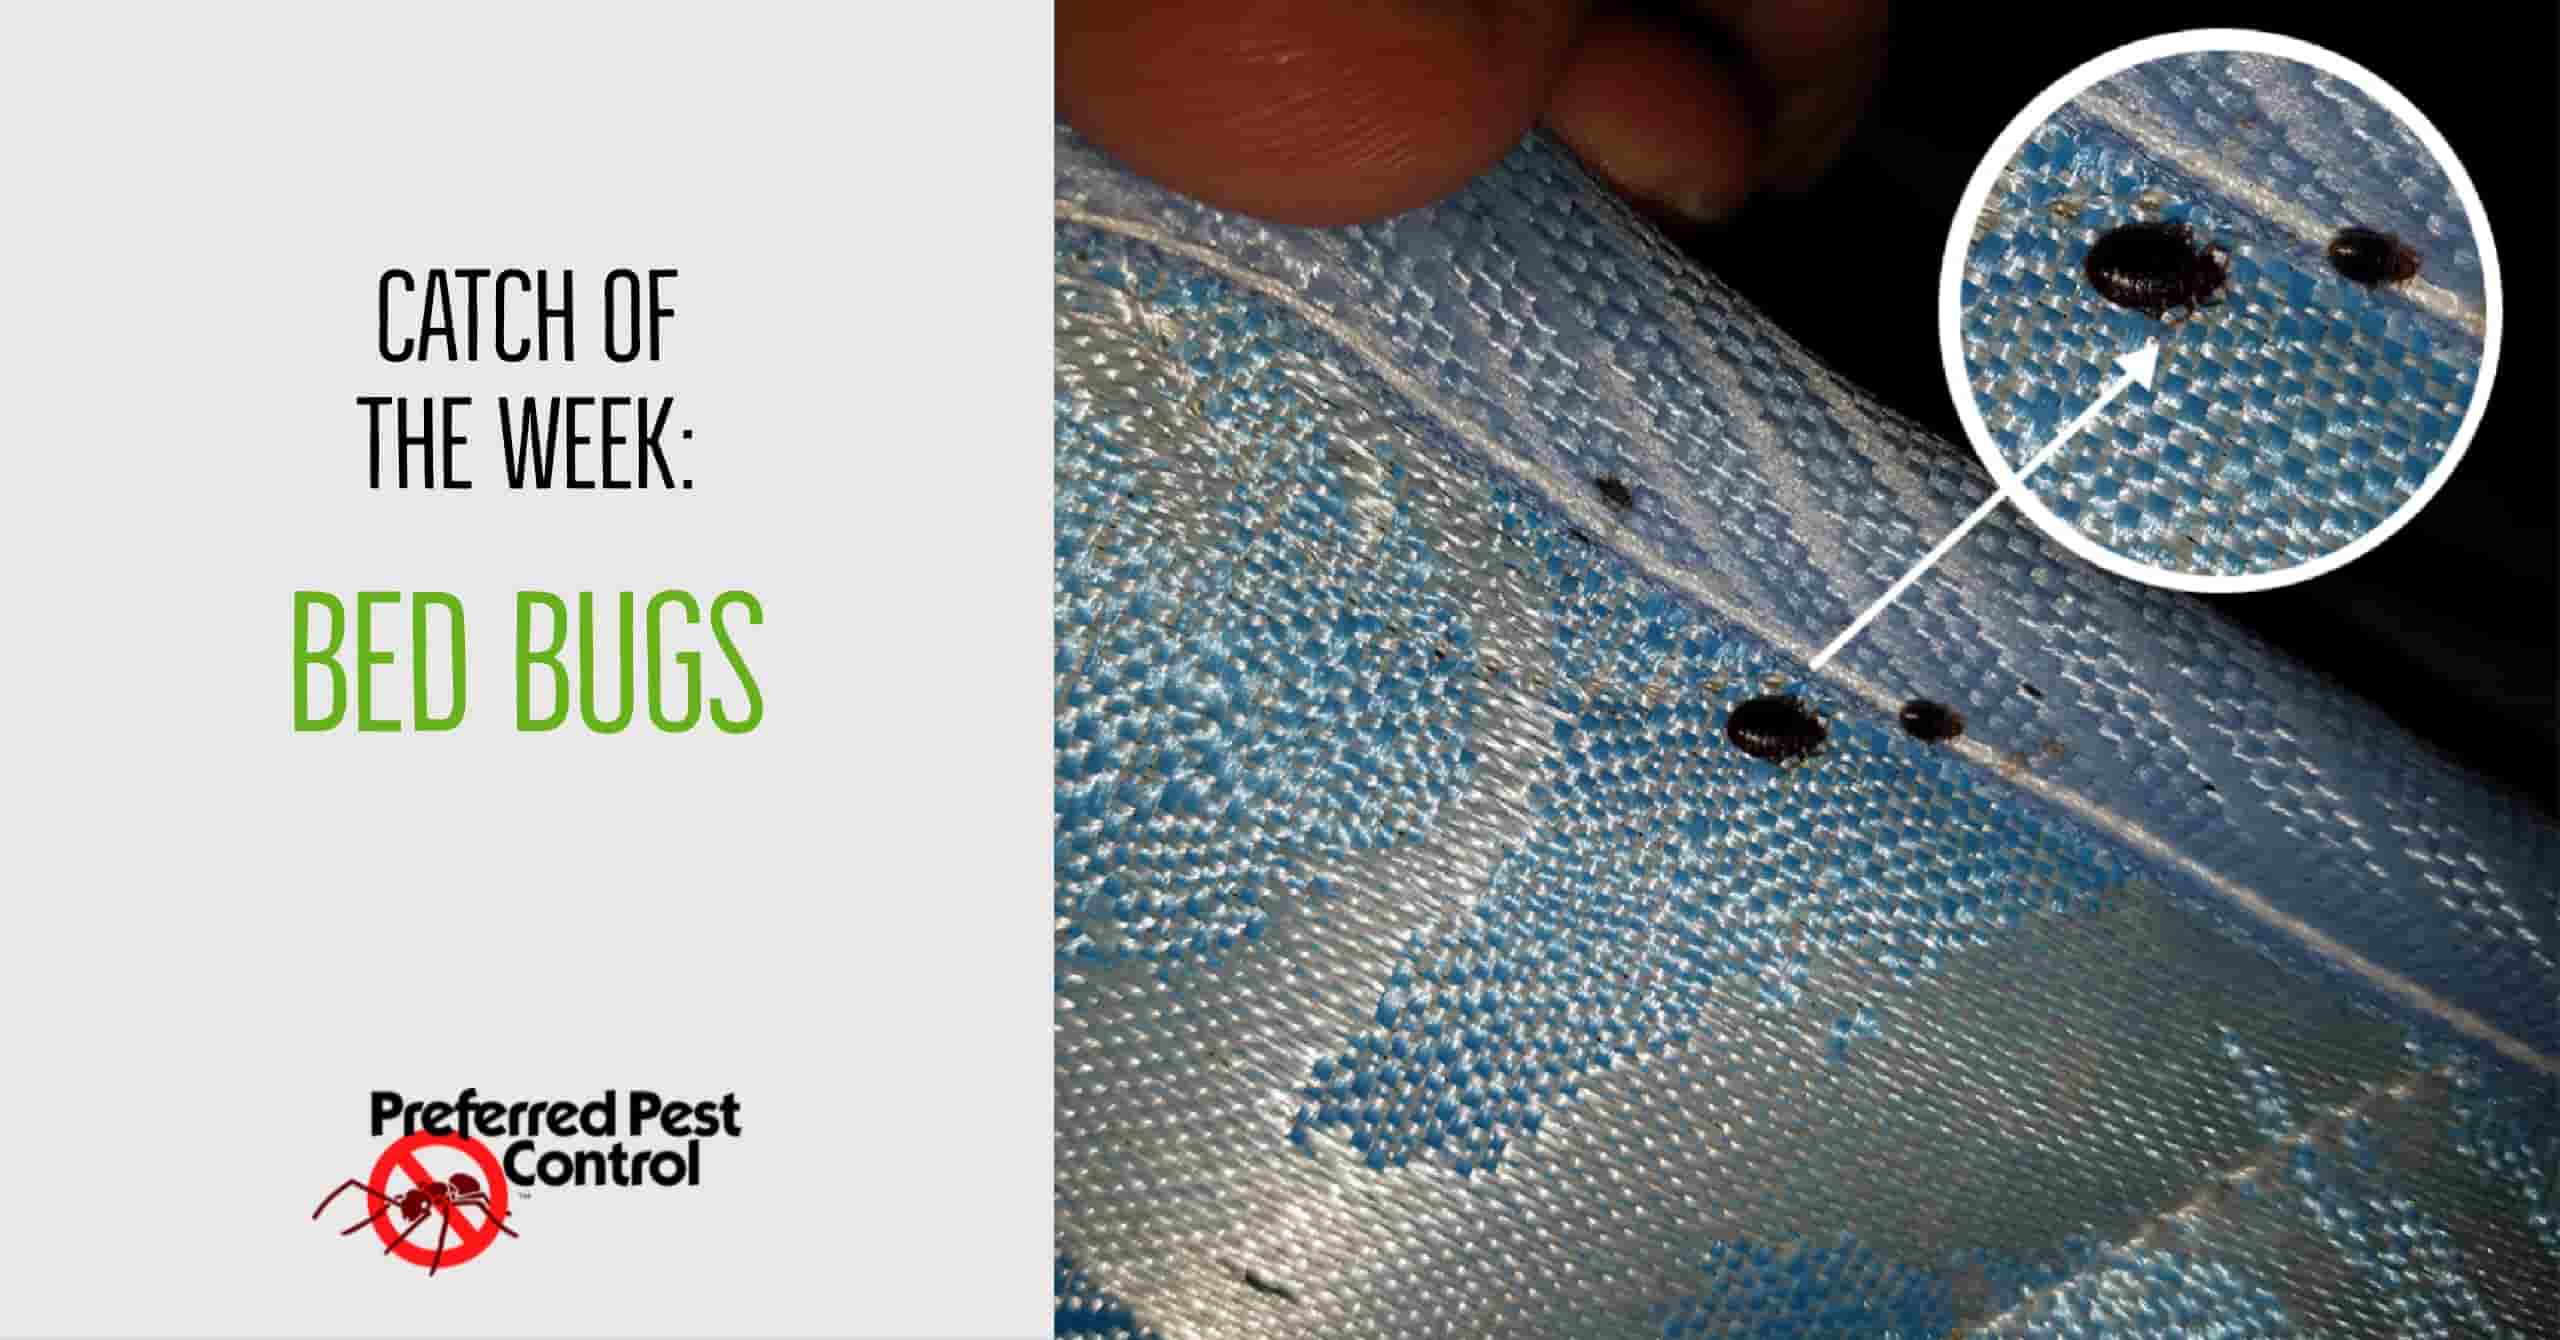 Catch of the Week: Bed Bugs